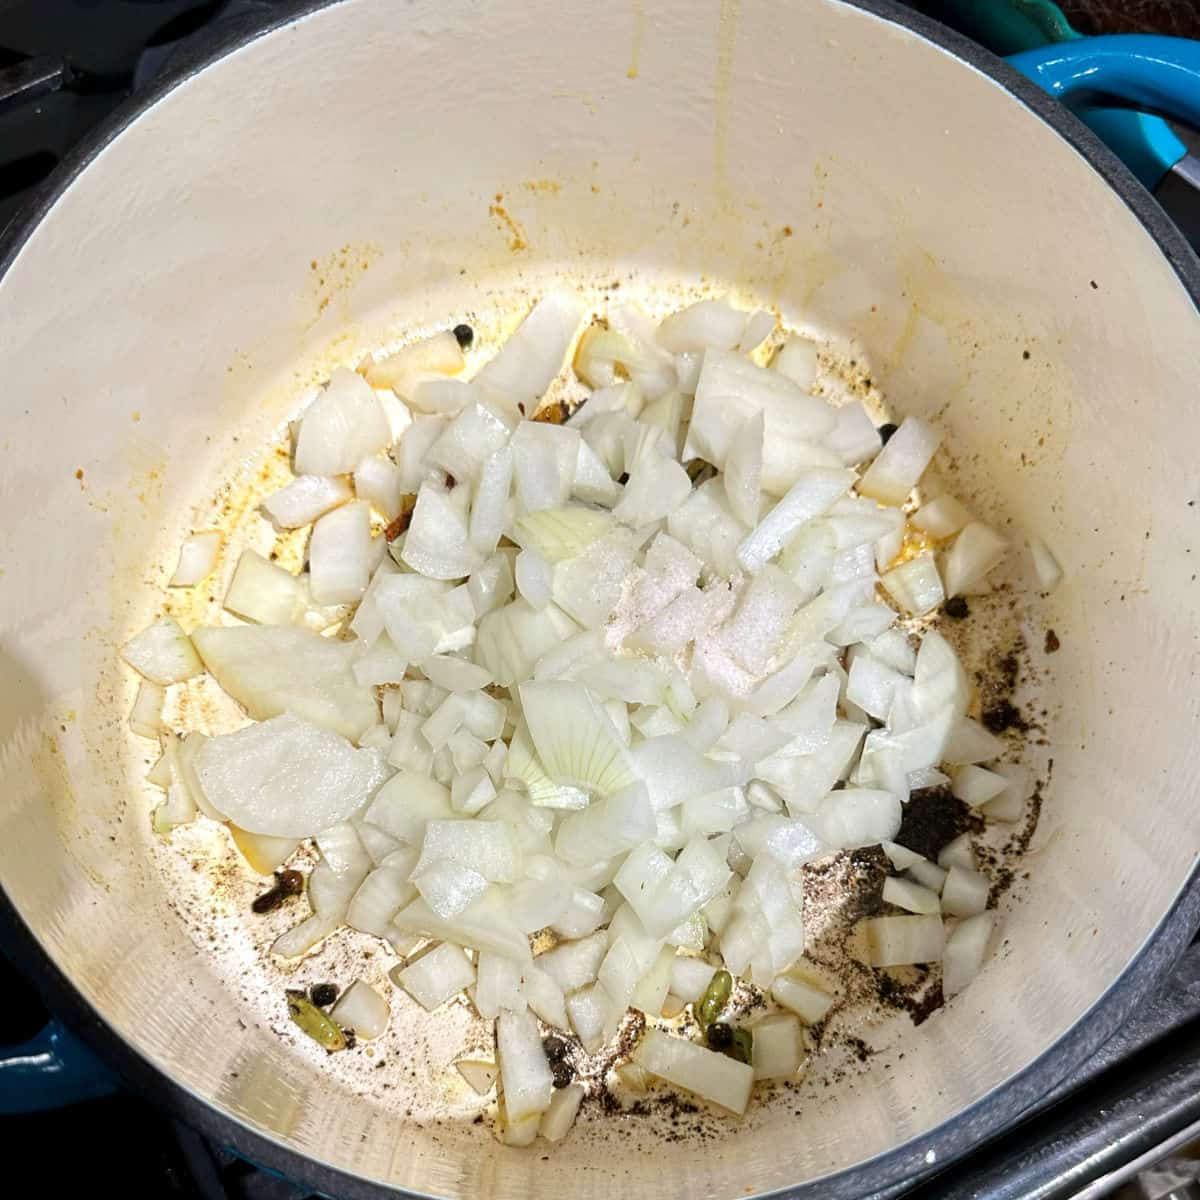 Onions added to pot with spices.